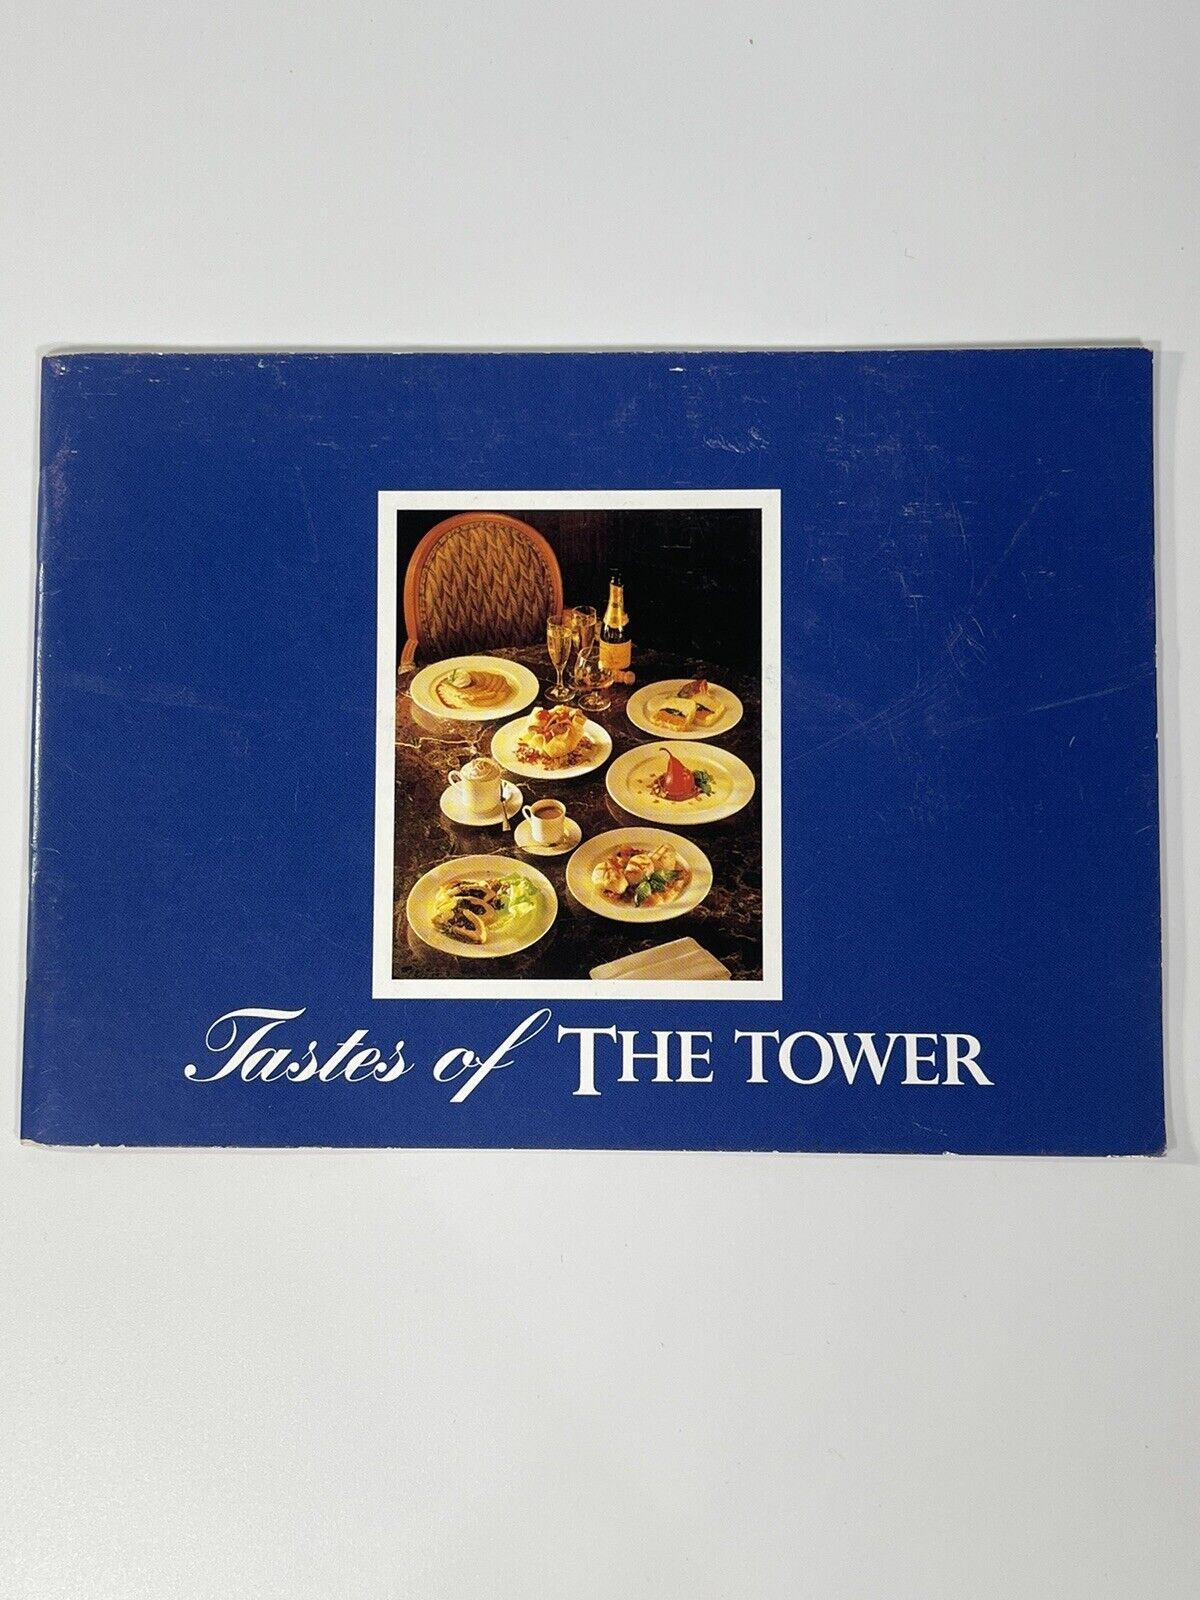 London The Tower a Thistle Hotel dining guide hotel brochure Pamphlet UK 1998